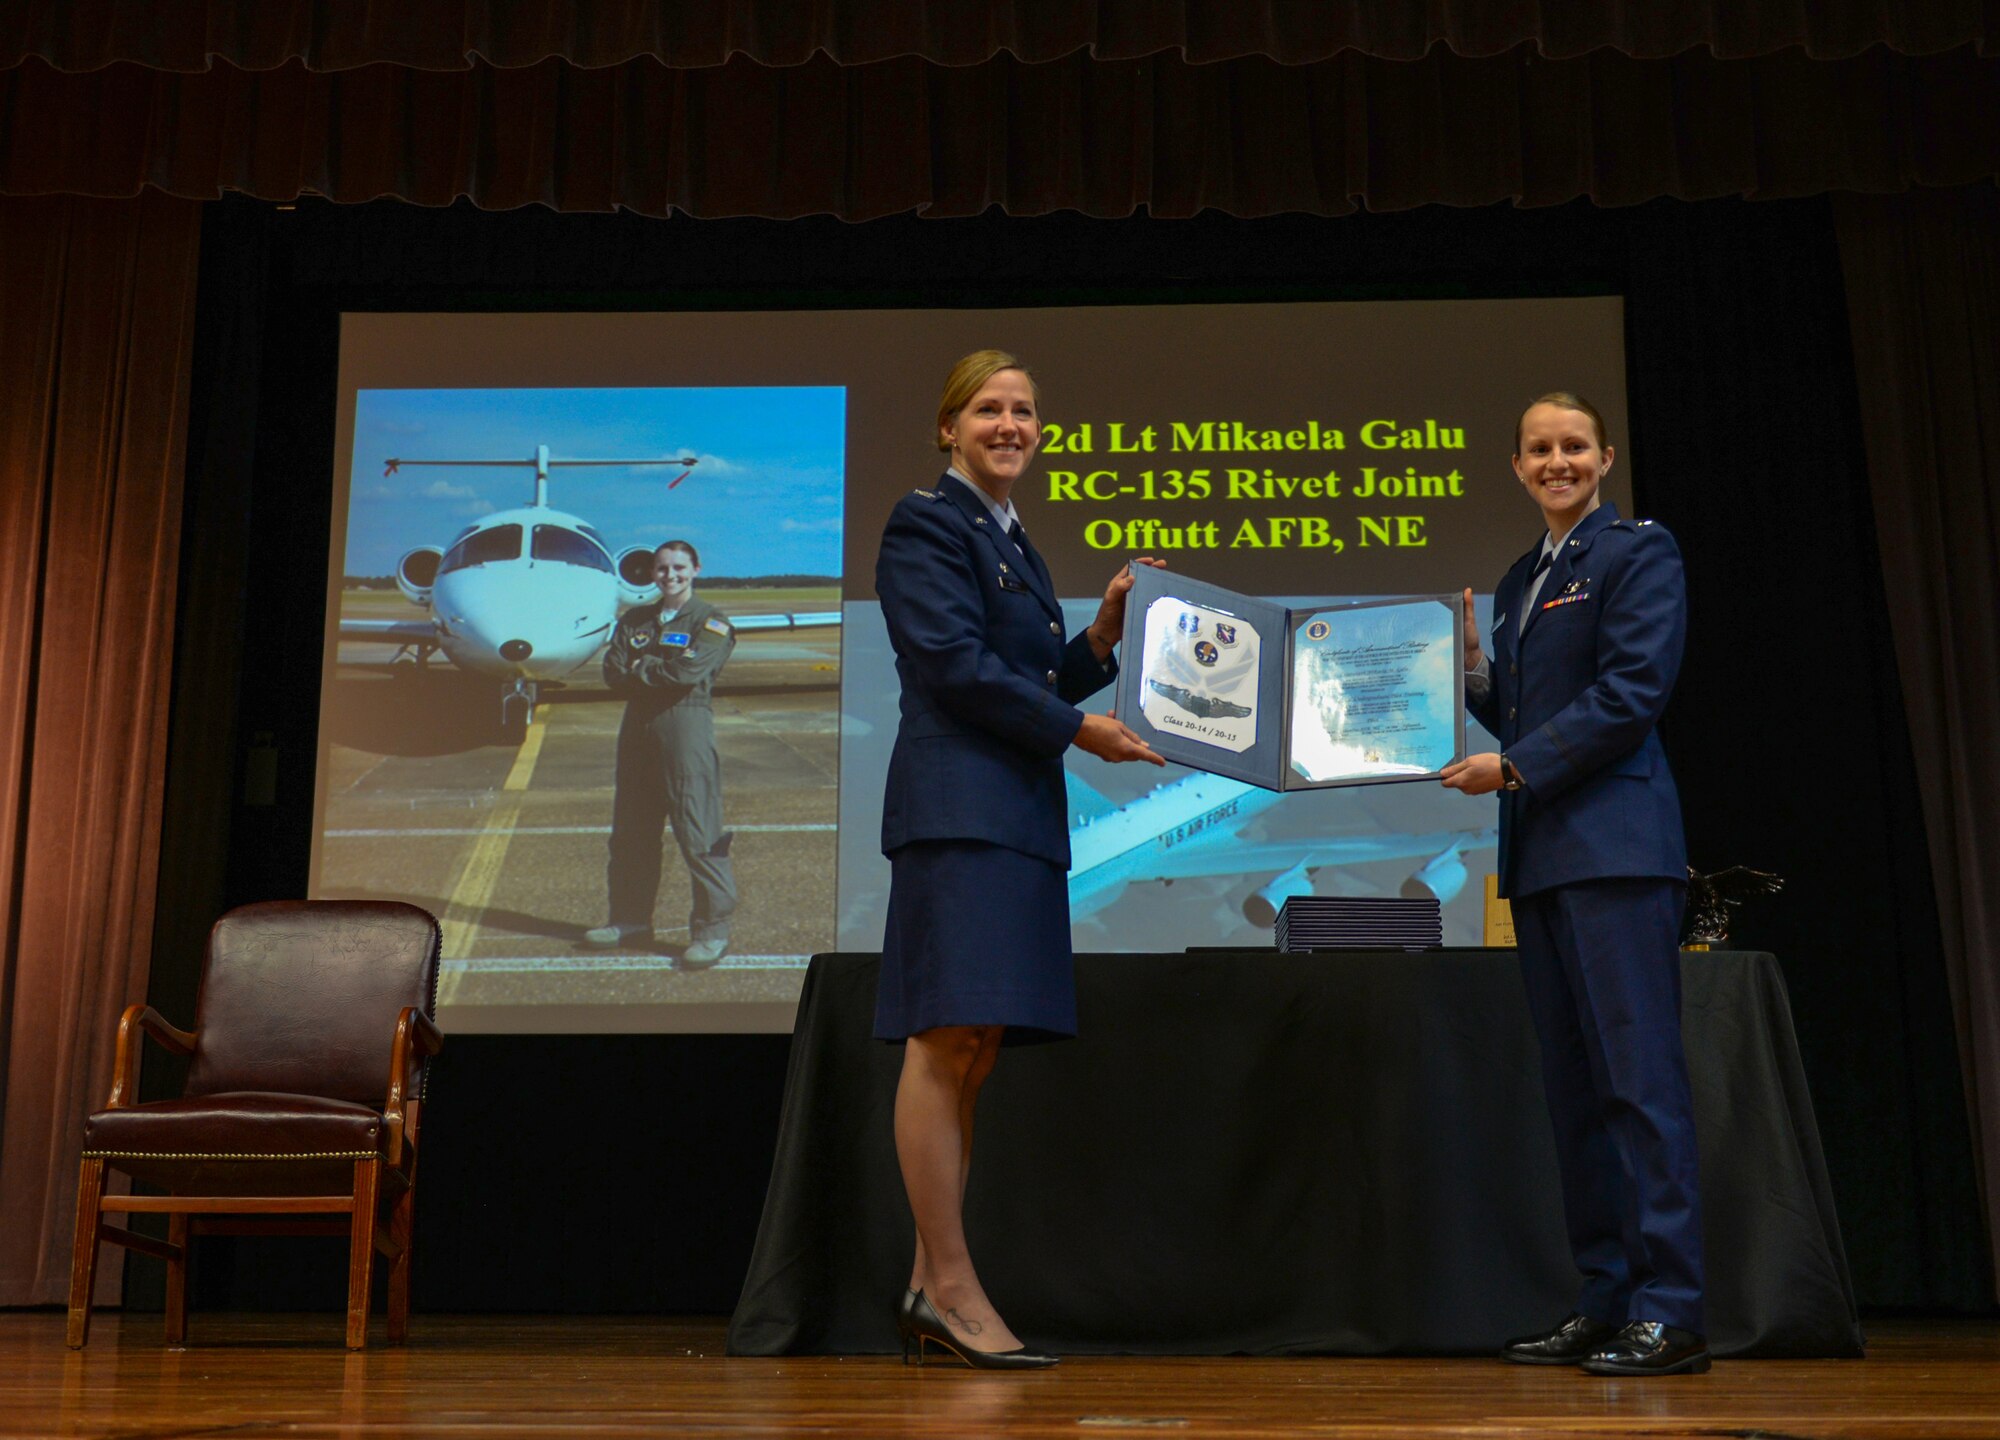 Col. Samantha Weeks, former 14th Flying Training Wing commander, hands a certificate to 2nd Lt. Mikaela Galu, Specialized Undergraduate Training Class 20-14/15 graduate, on May 15, 2020, at Columbus Air Force Base, Miss. In order to graduate from SUPT at Columbus AFB students must conduct over 52 weeks of training. (U.S. Air Force photo by Airman 1st Class Davis Donaldson)